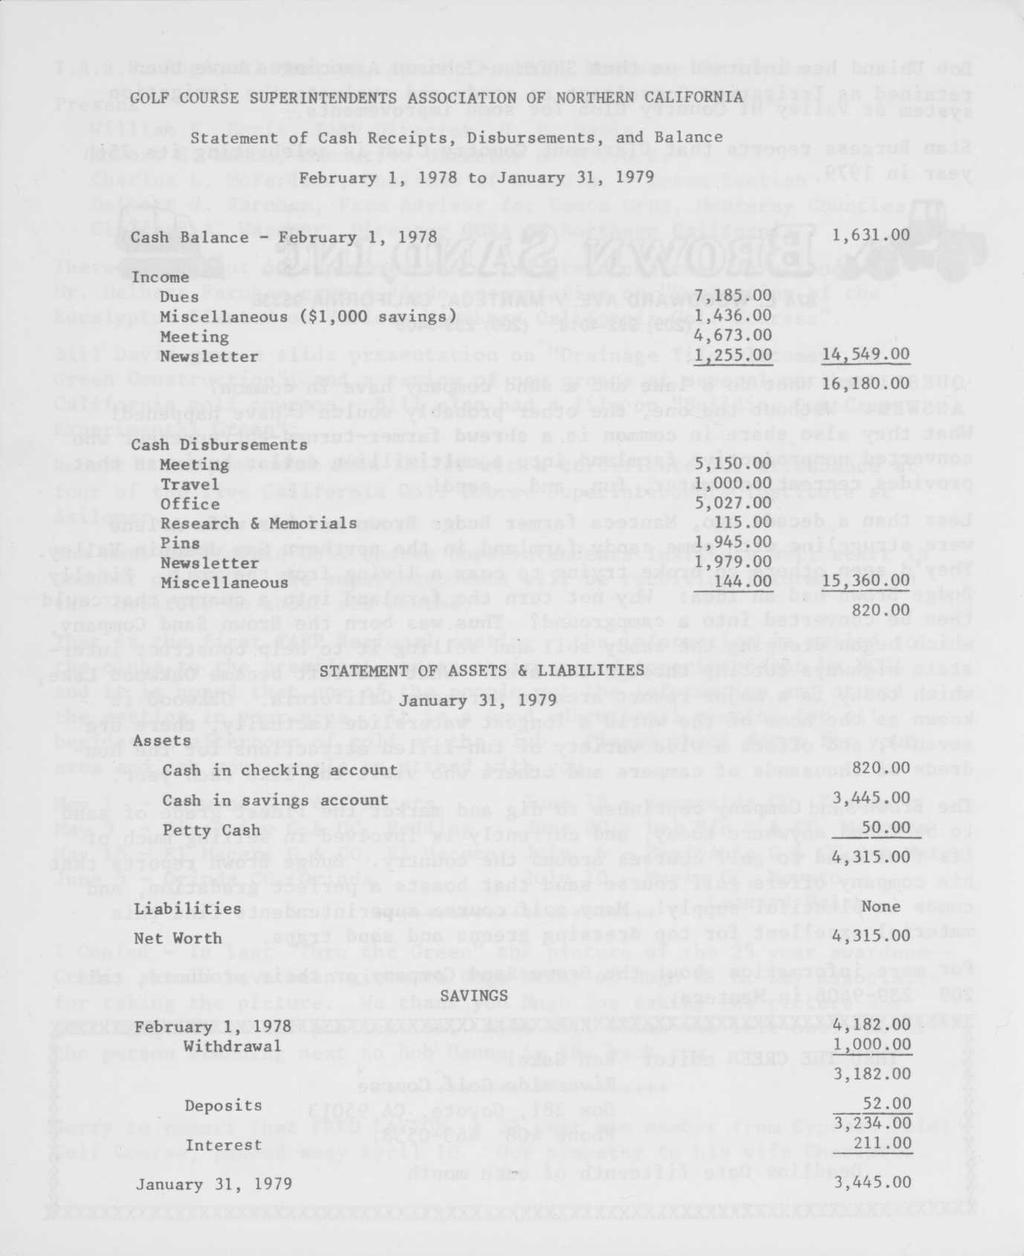 GOLF COURSE SUPERINTENDENTS ASSOCIATION OF NORTHERN CALIFORNIA Statement of Cash Receipts, Disbursements, and Balance February 1, 1978 to January 31, 1979 Cash Balance - February 1, 1978 Income Dues